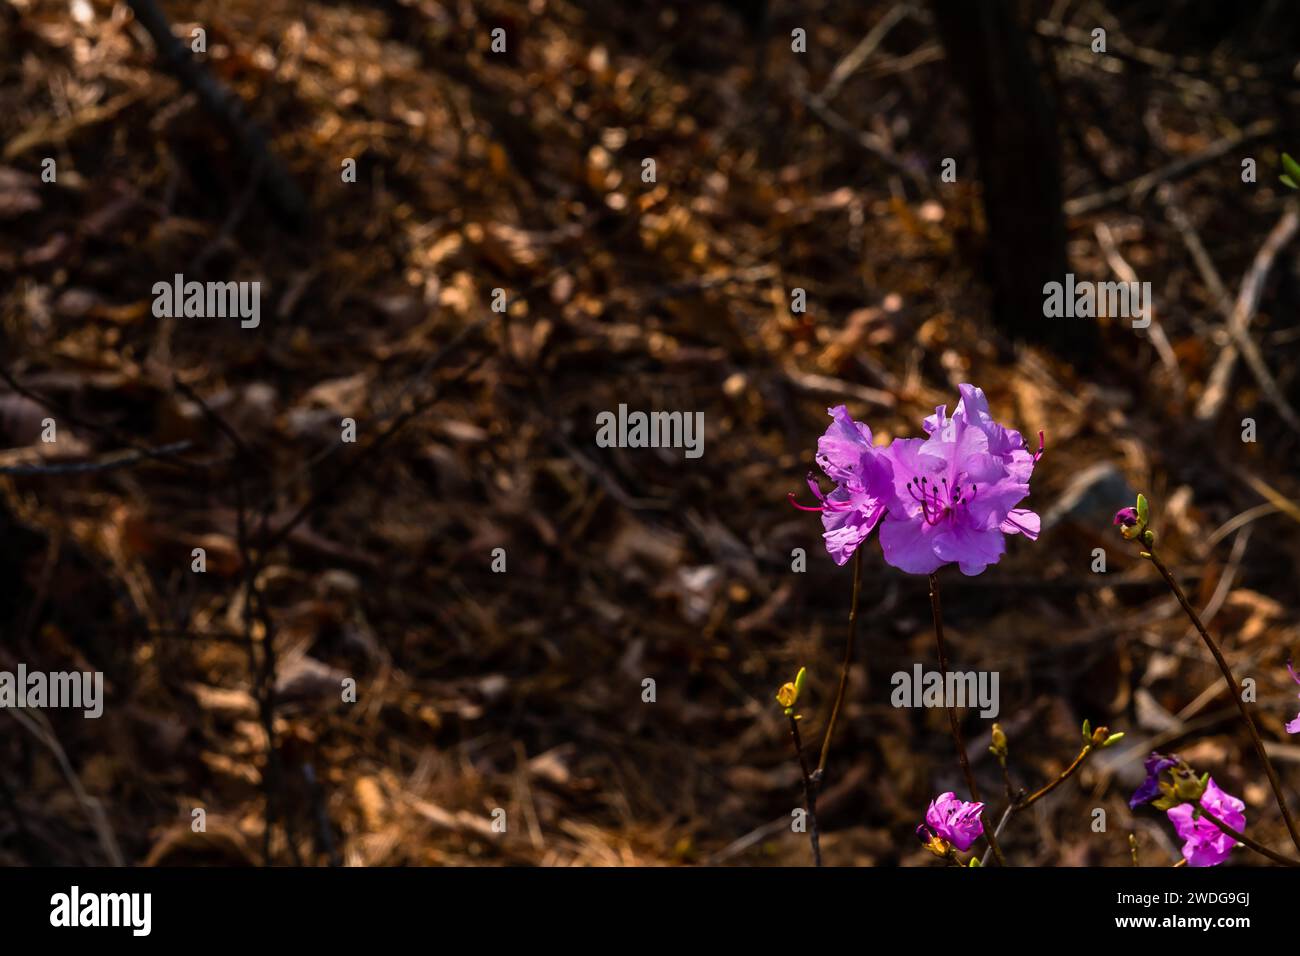 Delicate lilac colored flowers bathed in soft sunlight with forest floor blurred out in background, South Korea, South Korea Stock Photo